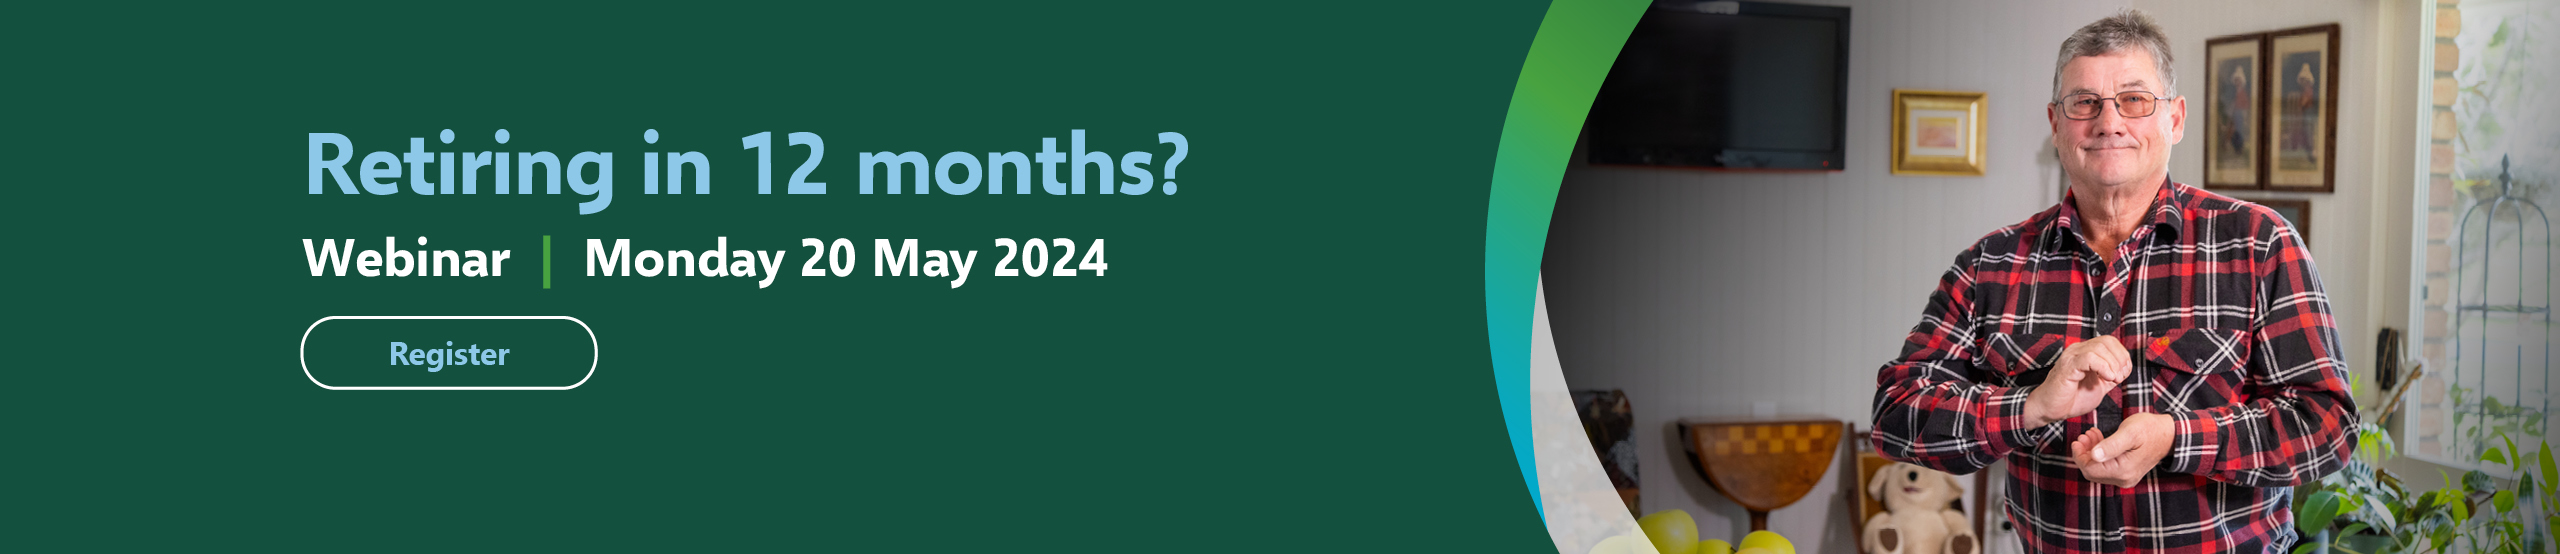 Retiring in 12 months? Register for our webinar - Monday 20 May 2024 banner